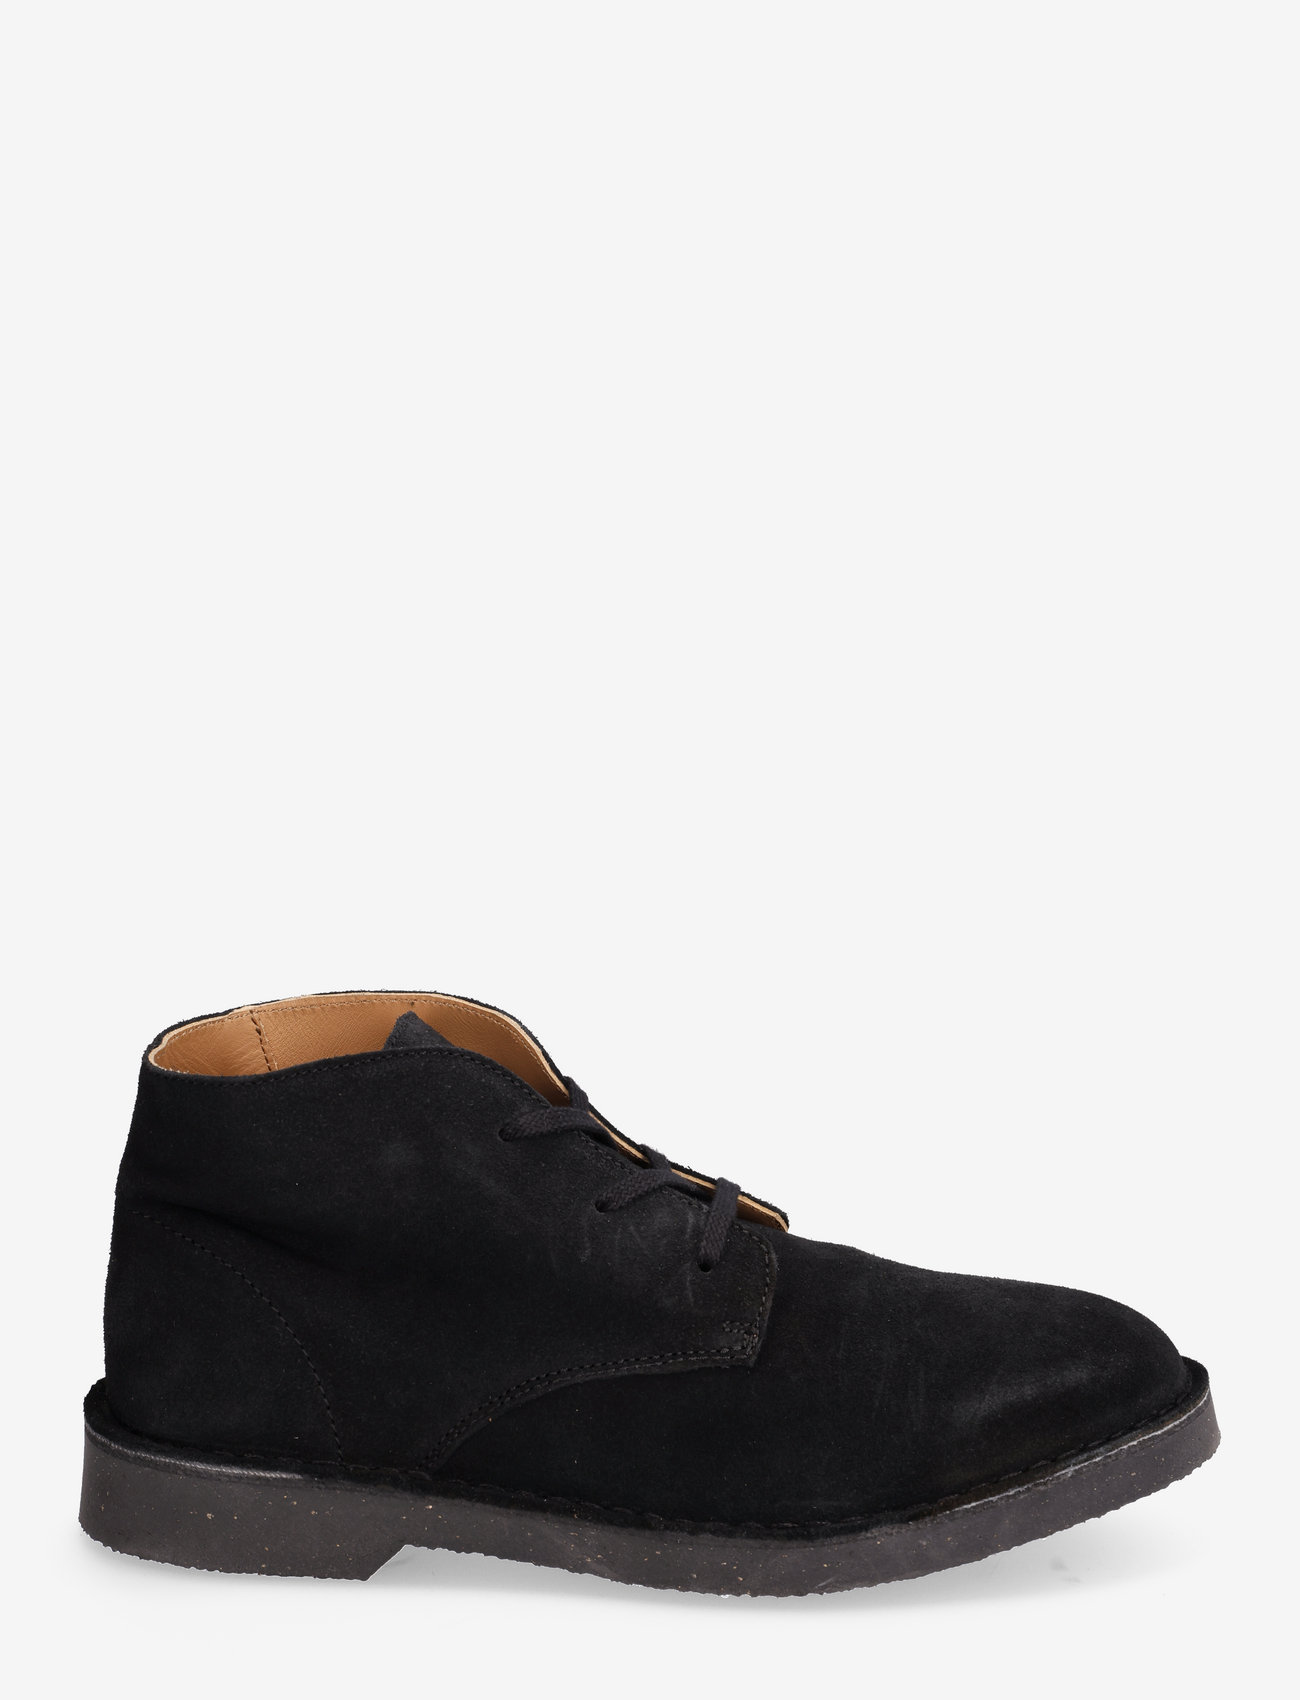 Selected Homme - SLHRIGA NEW SUEDE CHUKKA BOOT B - desert boots - black - 1